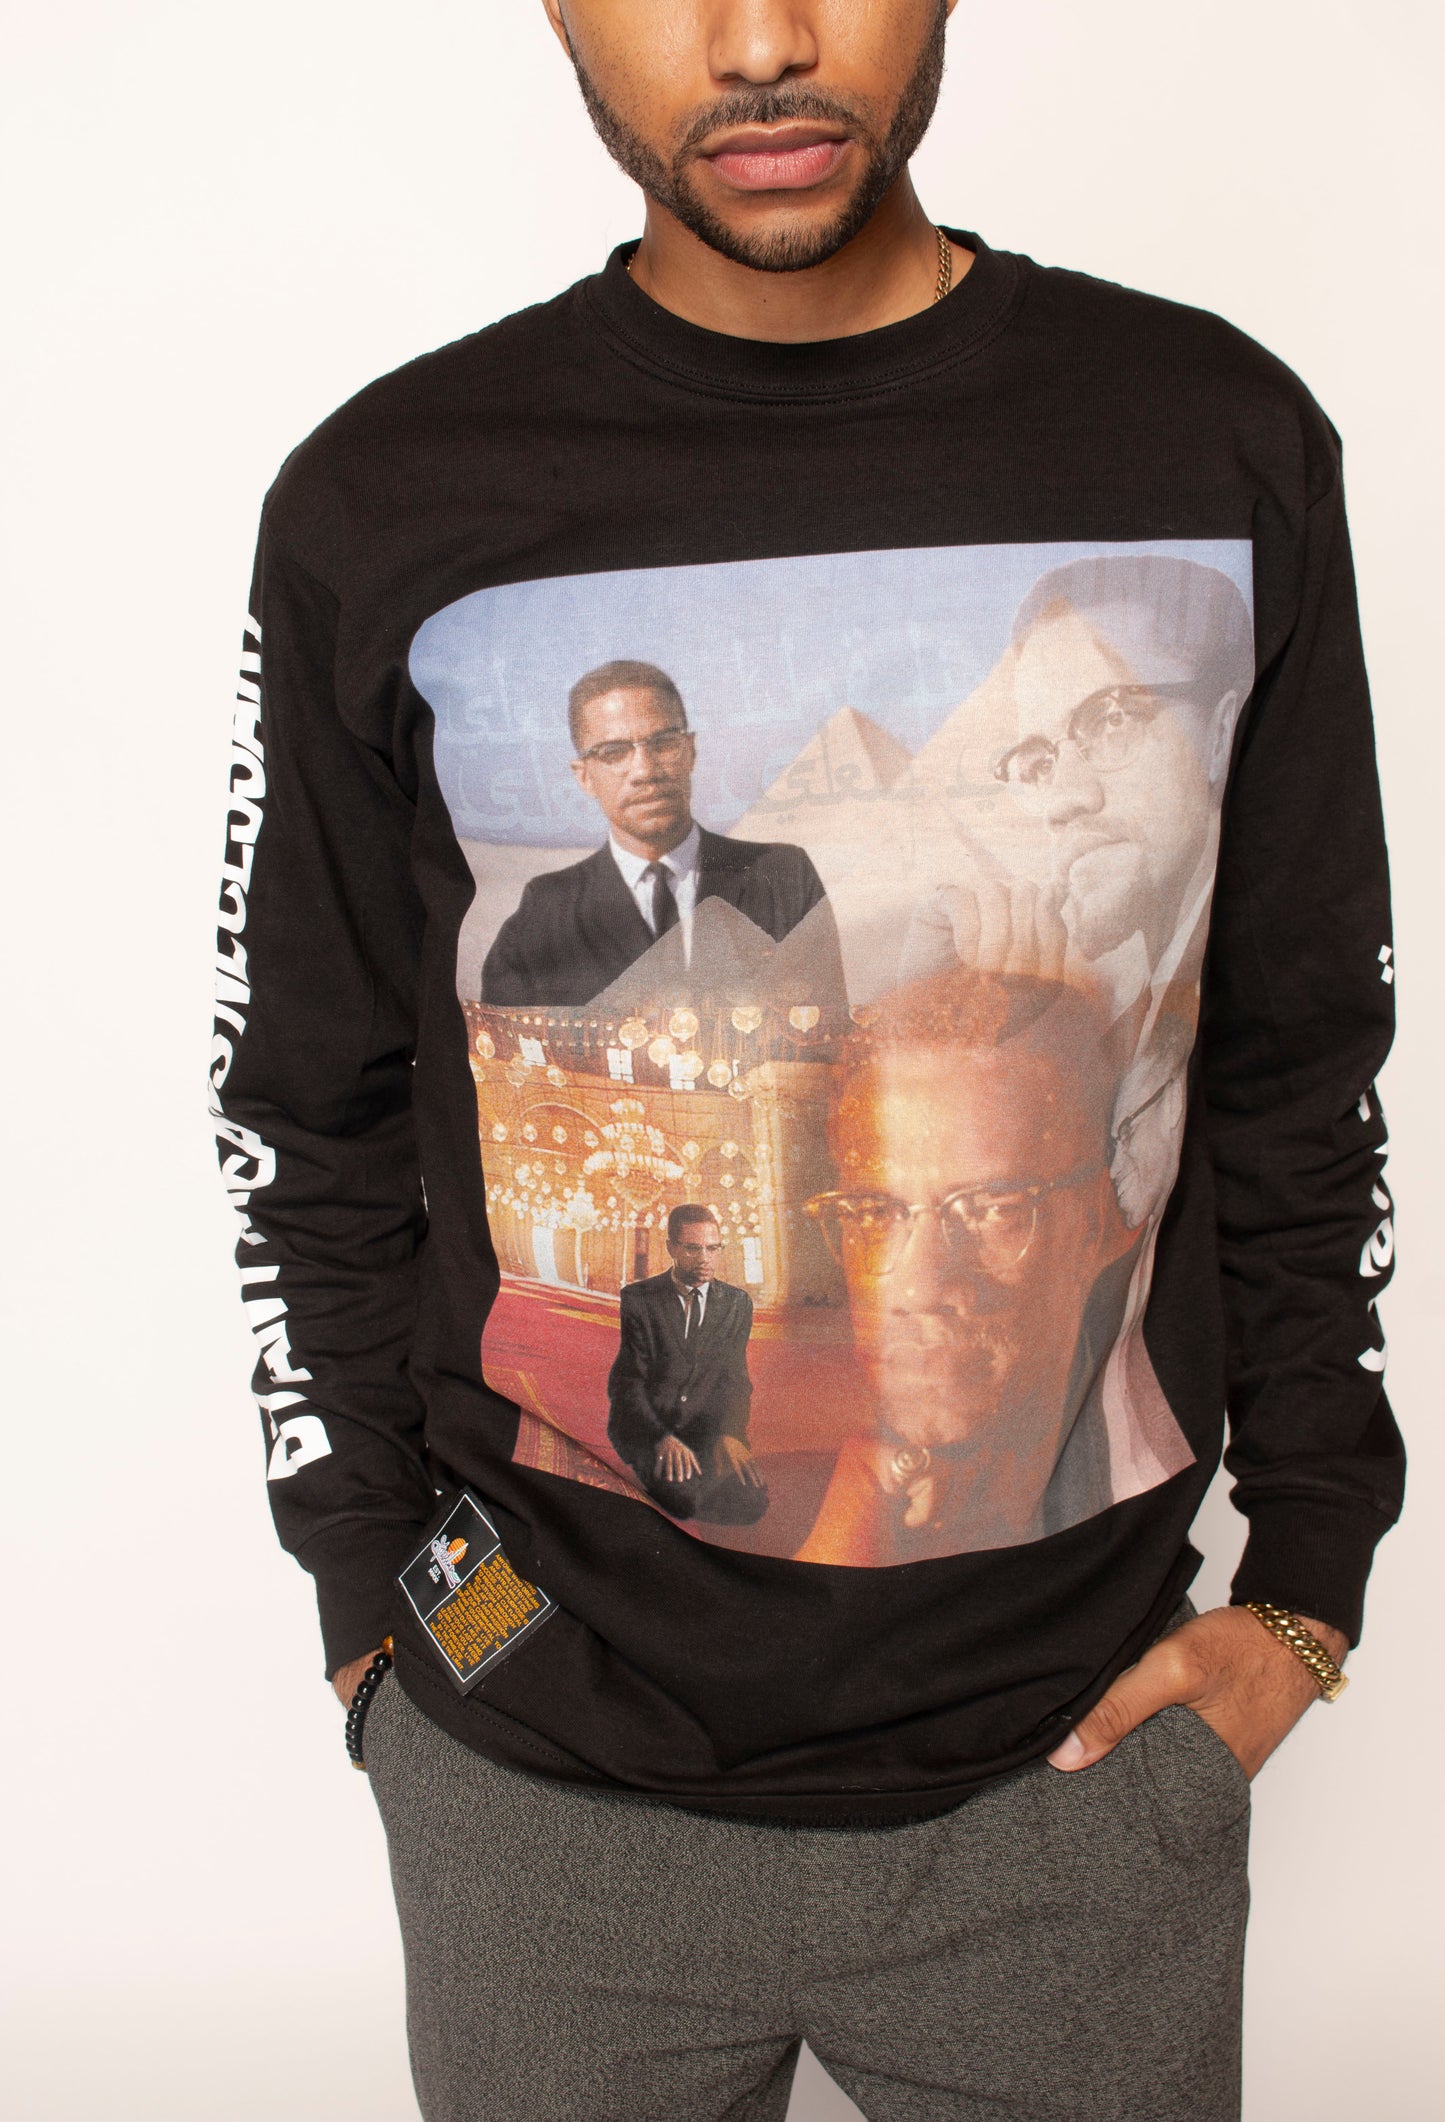 Malcolm X "By Any Means"